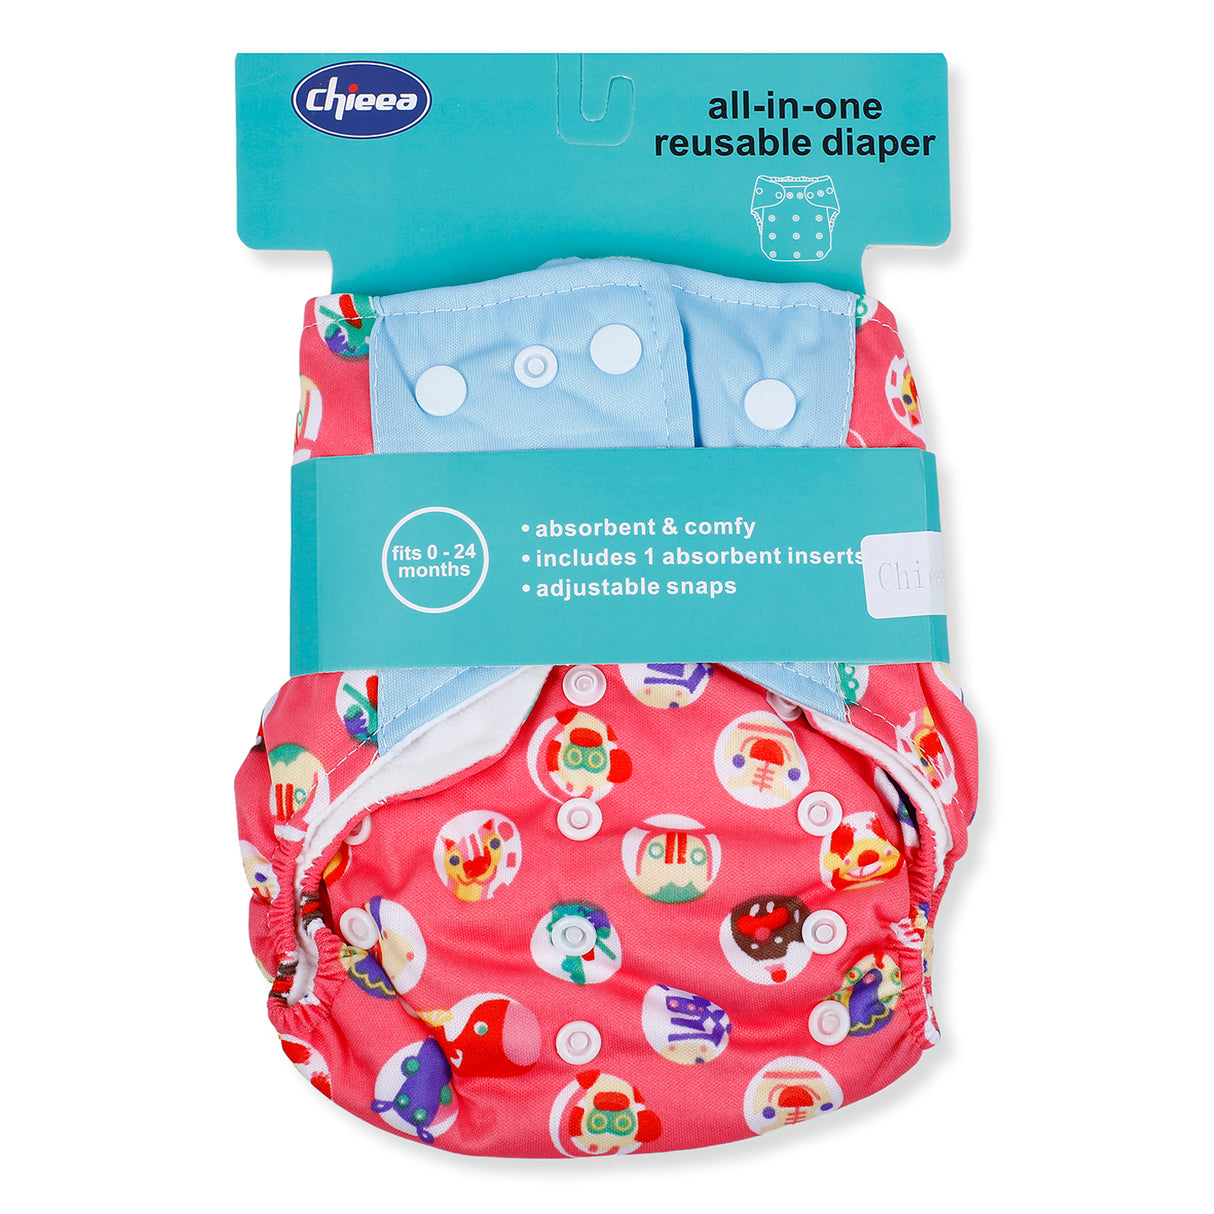 Chieea Printed Reusable Absorbent And Comfy Cloth Diaper